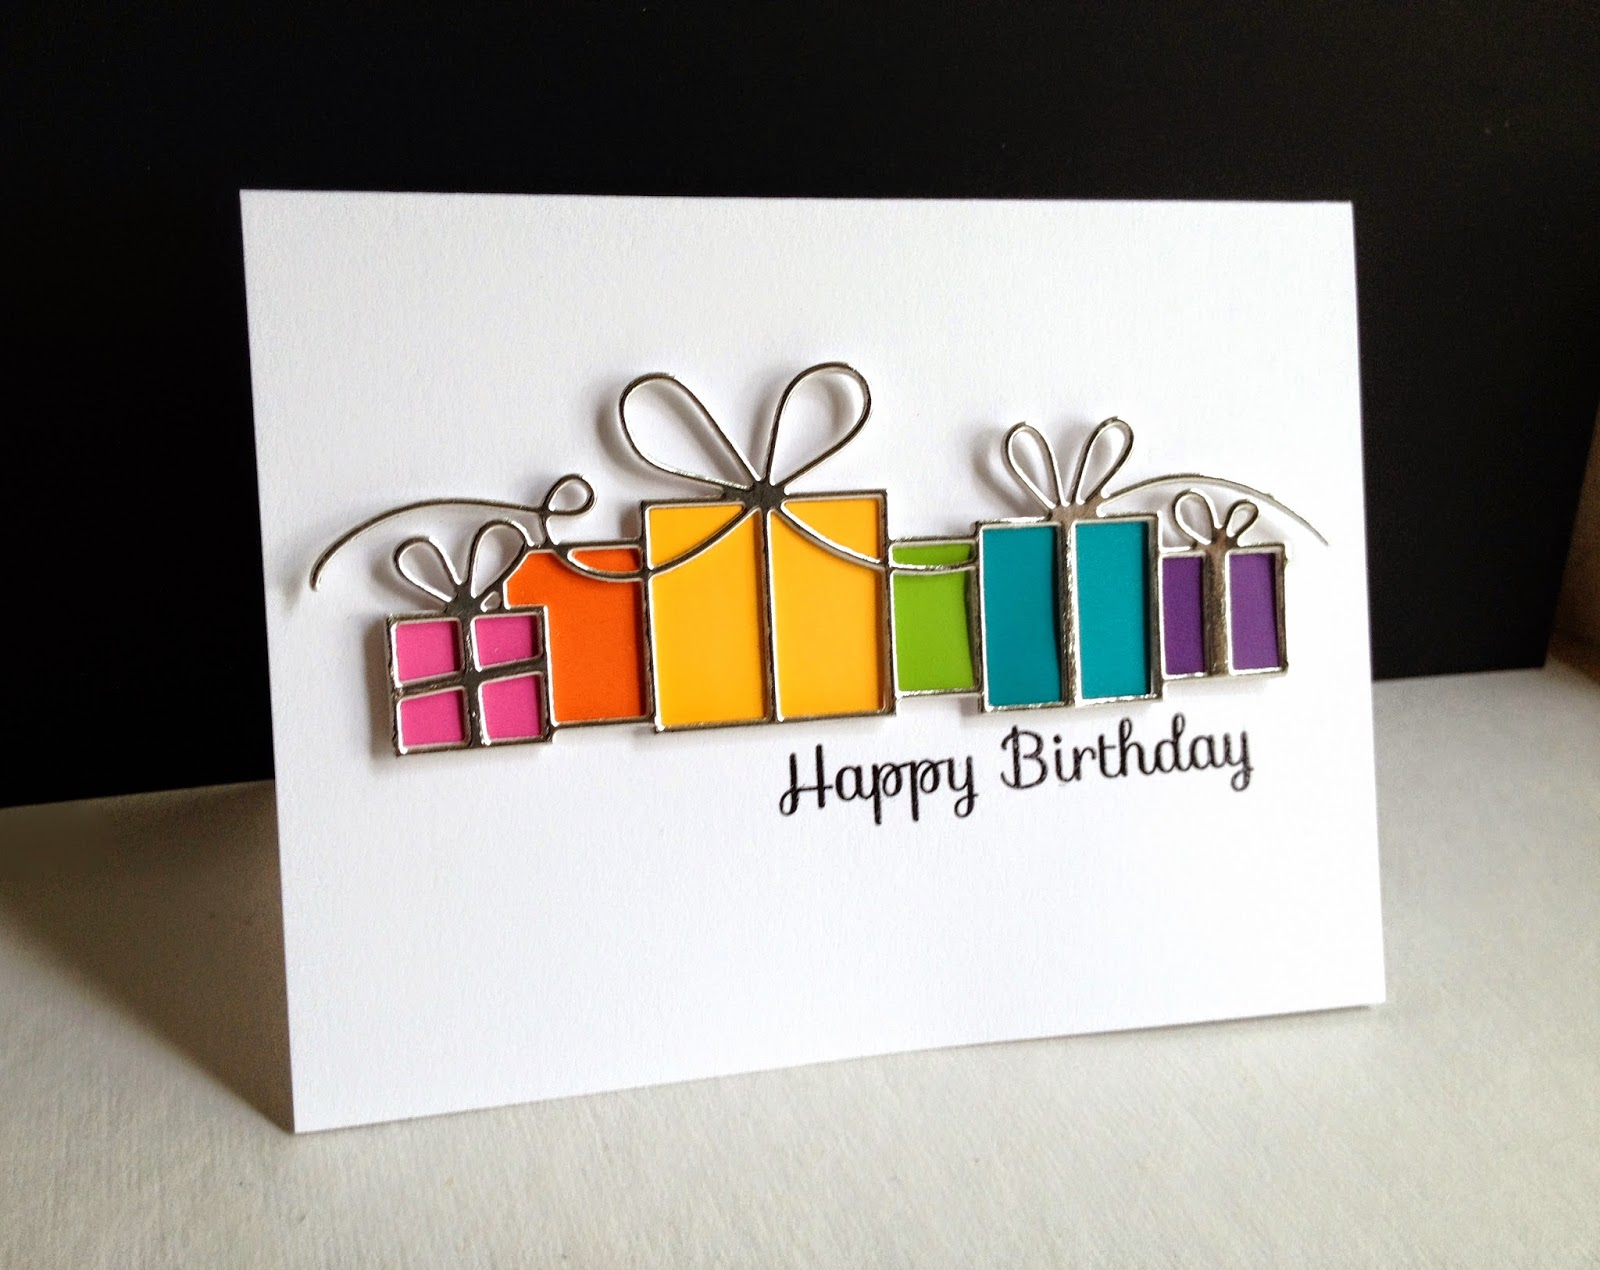 Happy Birthday Cards Homemade Ideas Birthday Games Themes Favors And Invites Ideas 2019 Thousands Of